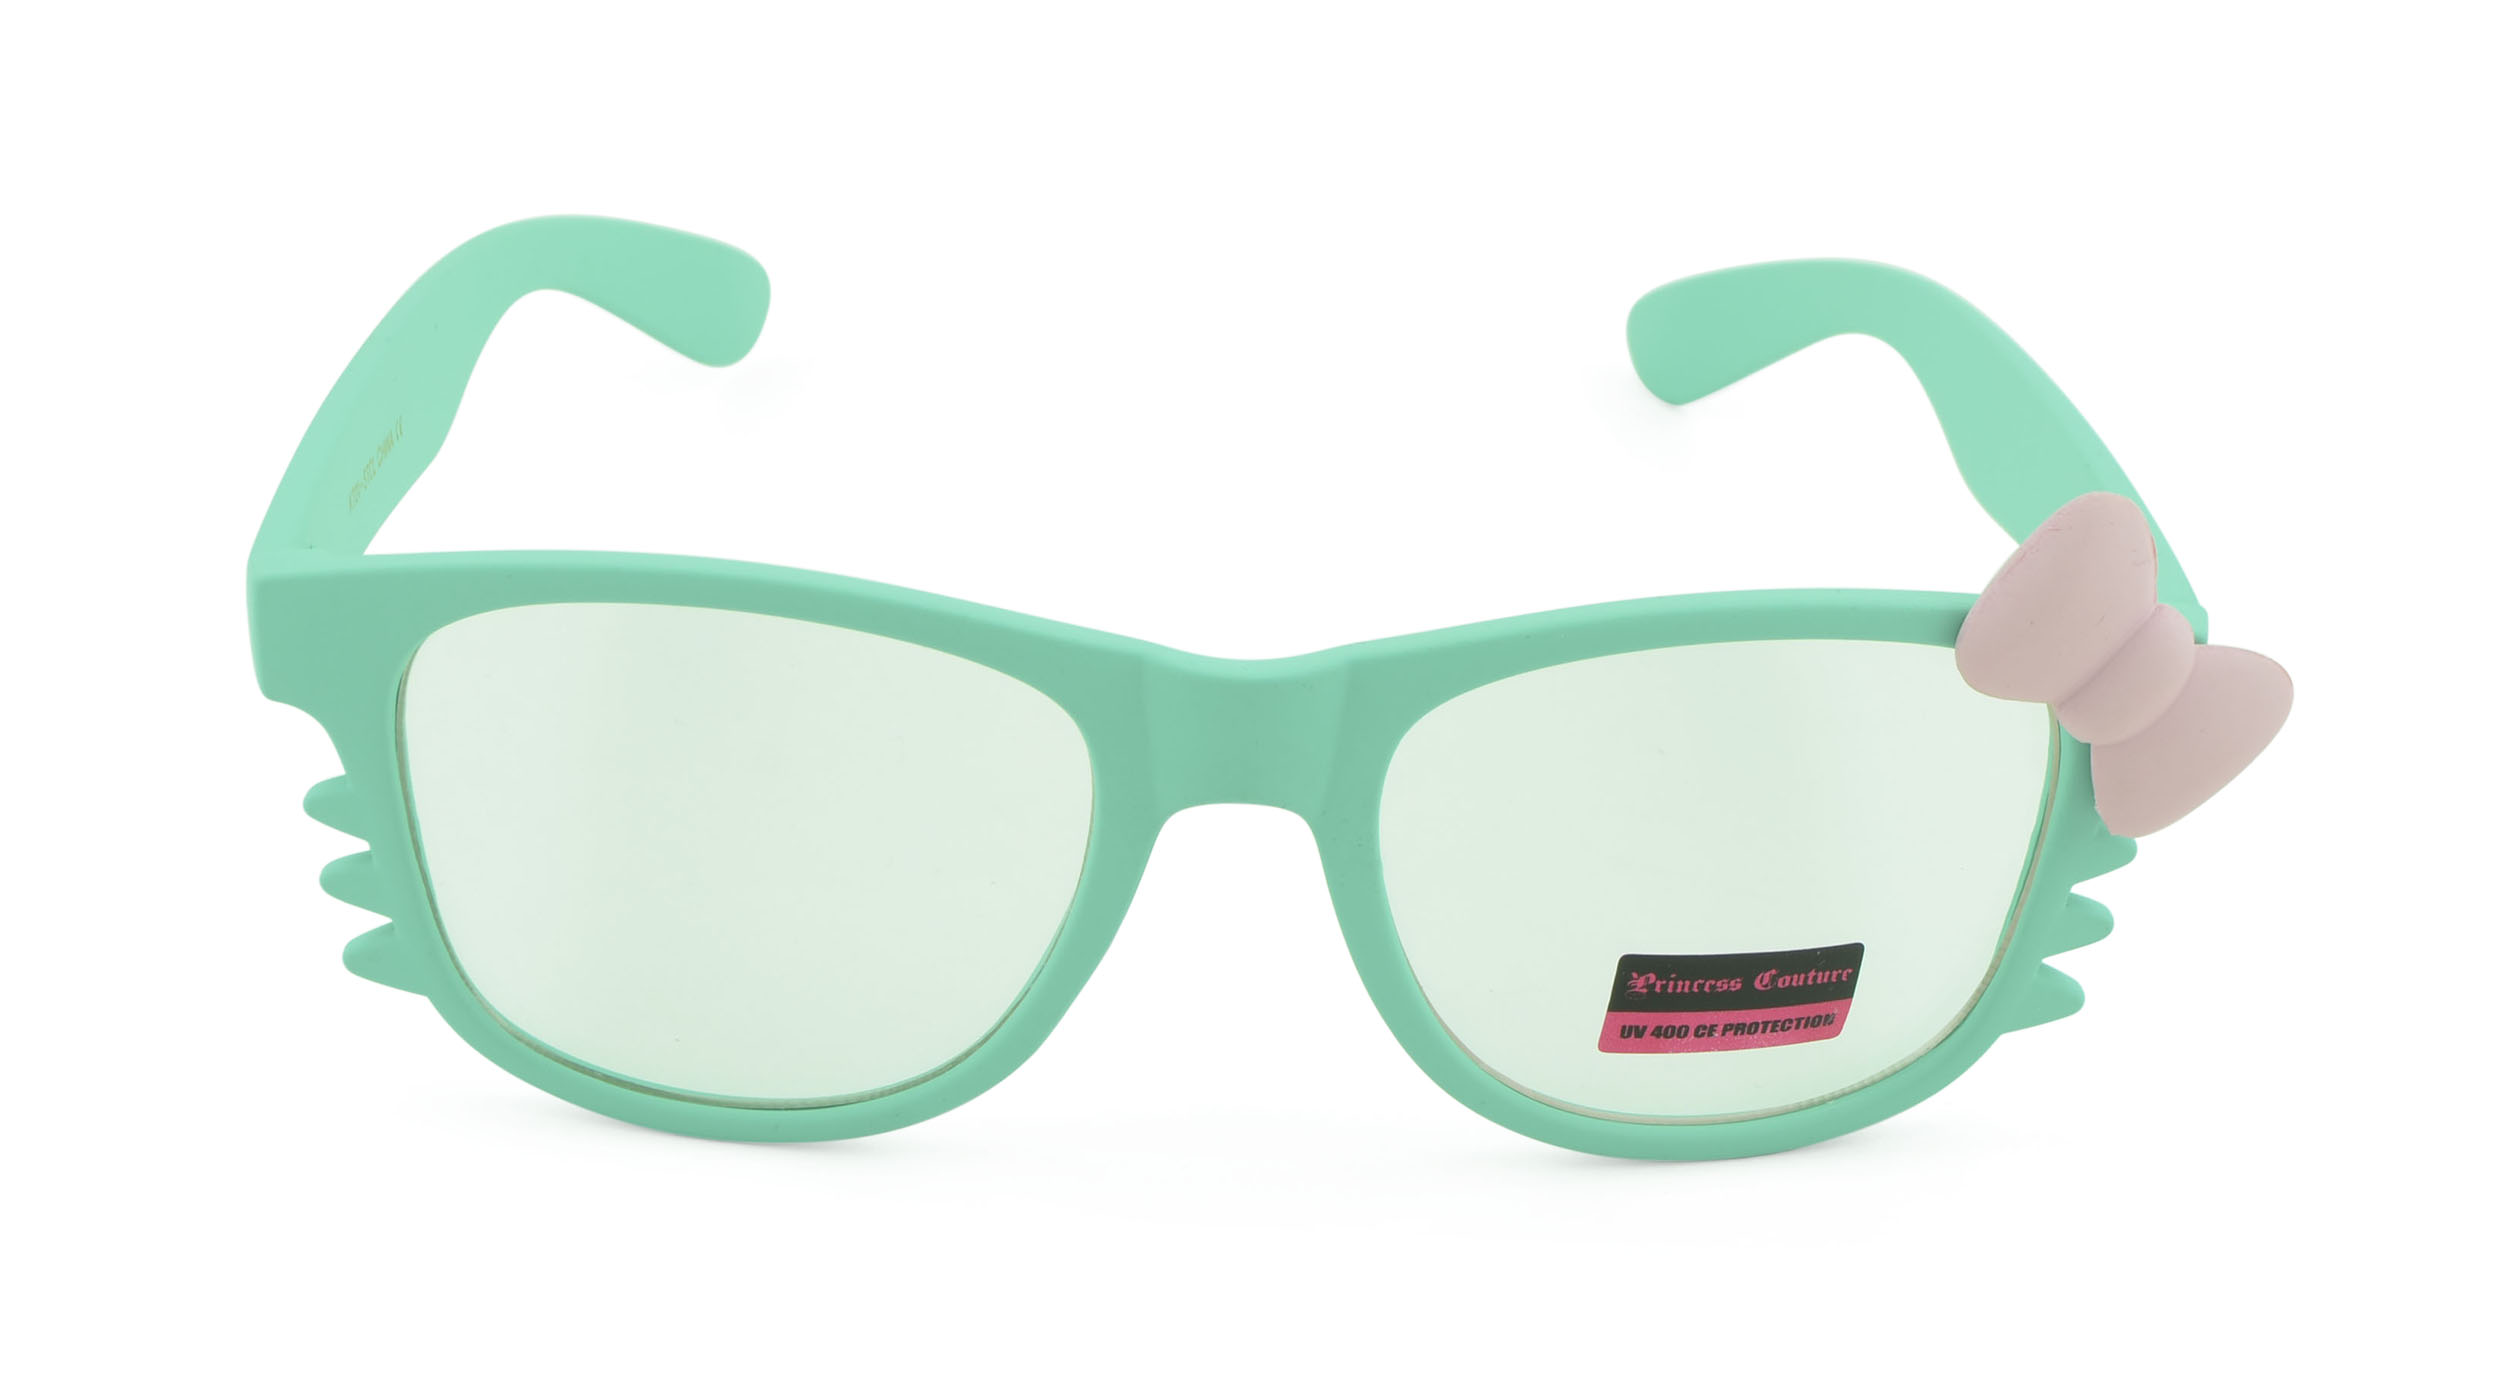 Belle Donne-Women's Kitty Cat Style Sunglasses | Whiskers and Bow Accent-Teal